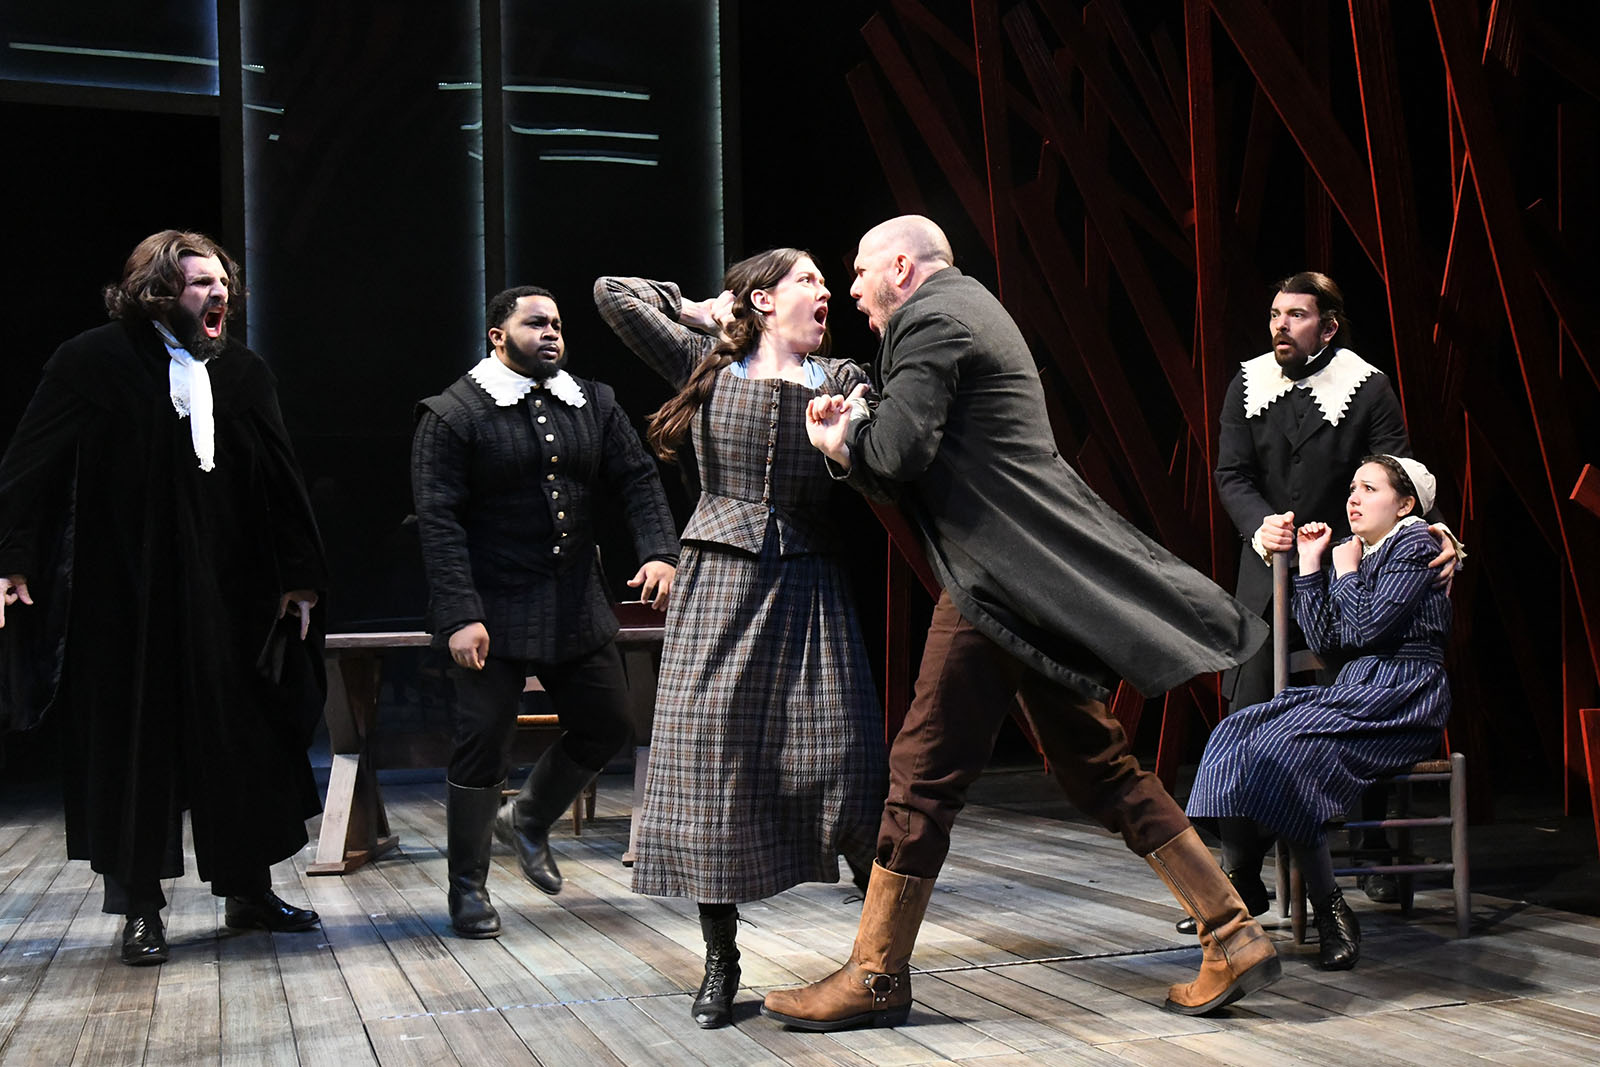 The Arthur Miller 1953 play The Crucible Focuses on Salem's Wicked